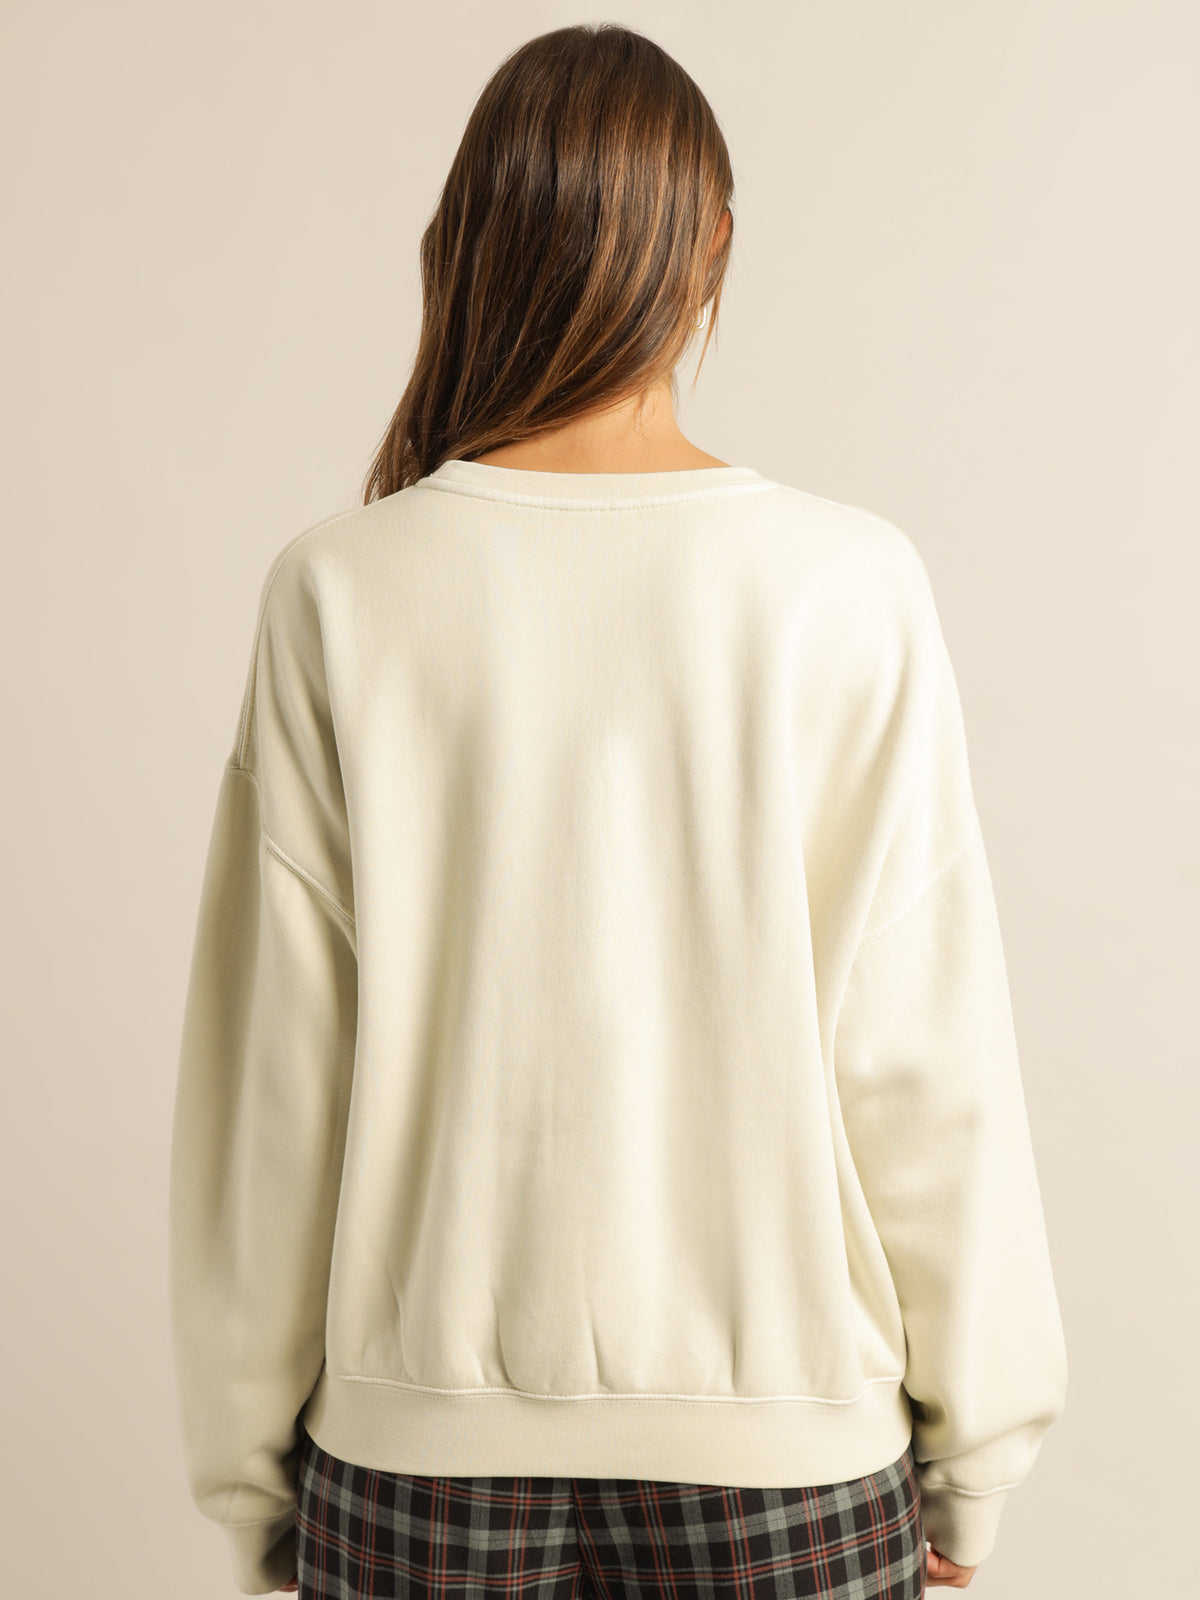 Campus Oversized Crew in Oatmeal